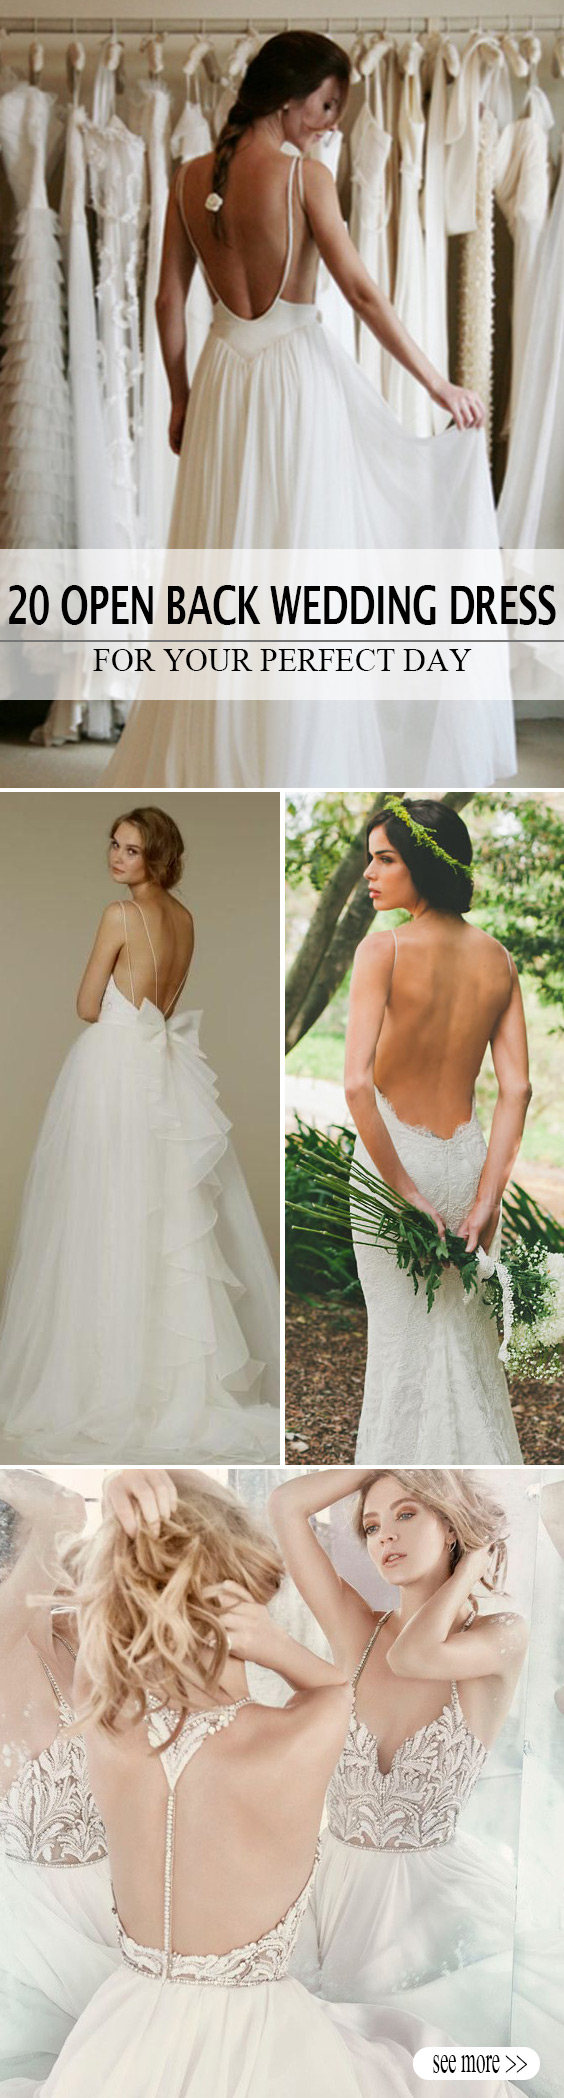 20 of the Most Gorgeous Open Back Wedding Dress & Backless Wedding Gowns